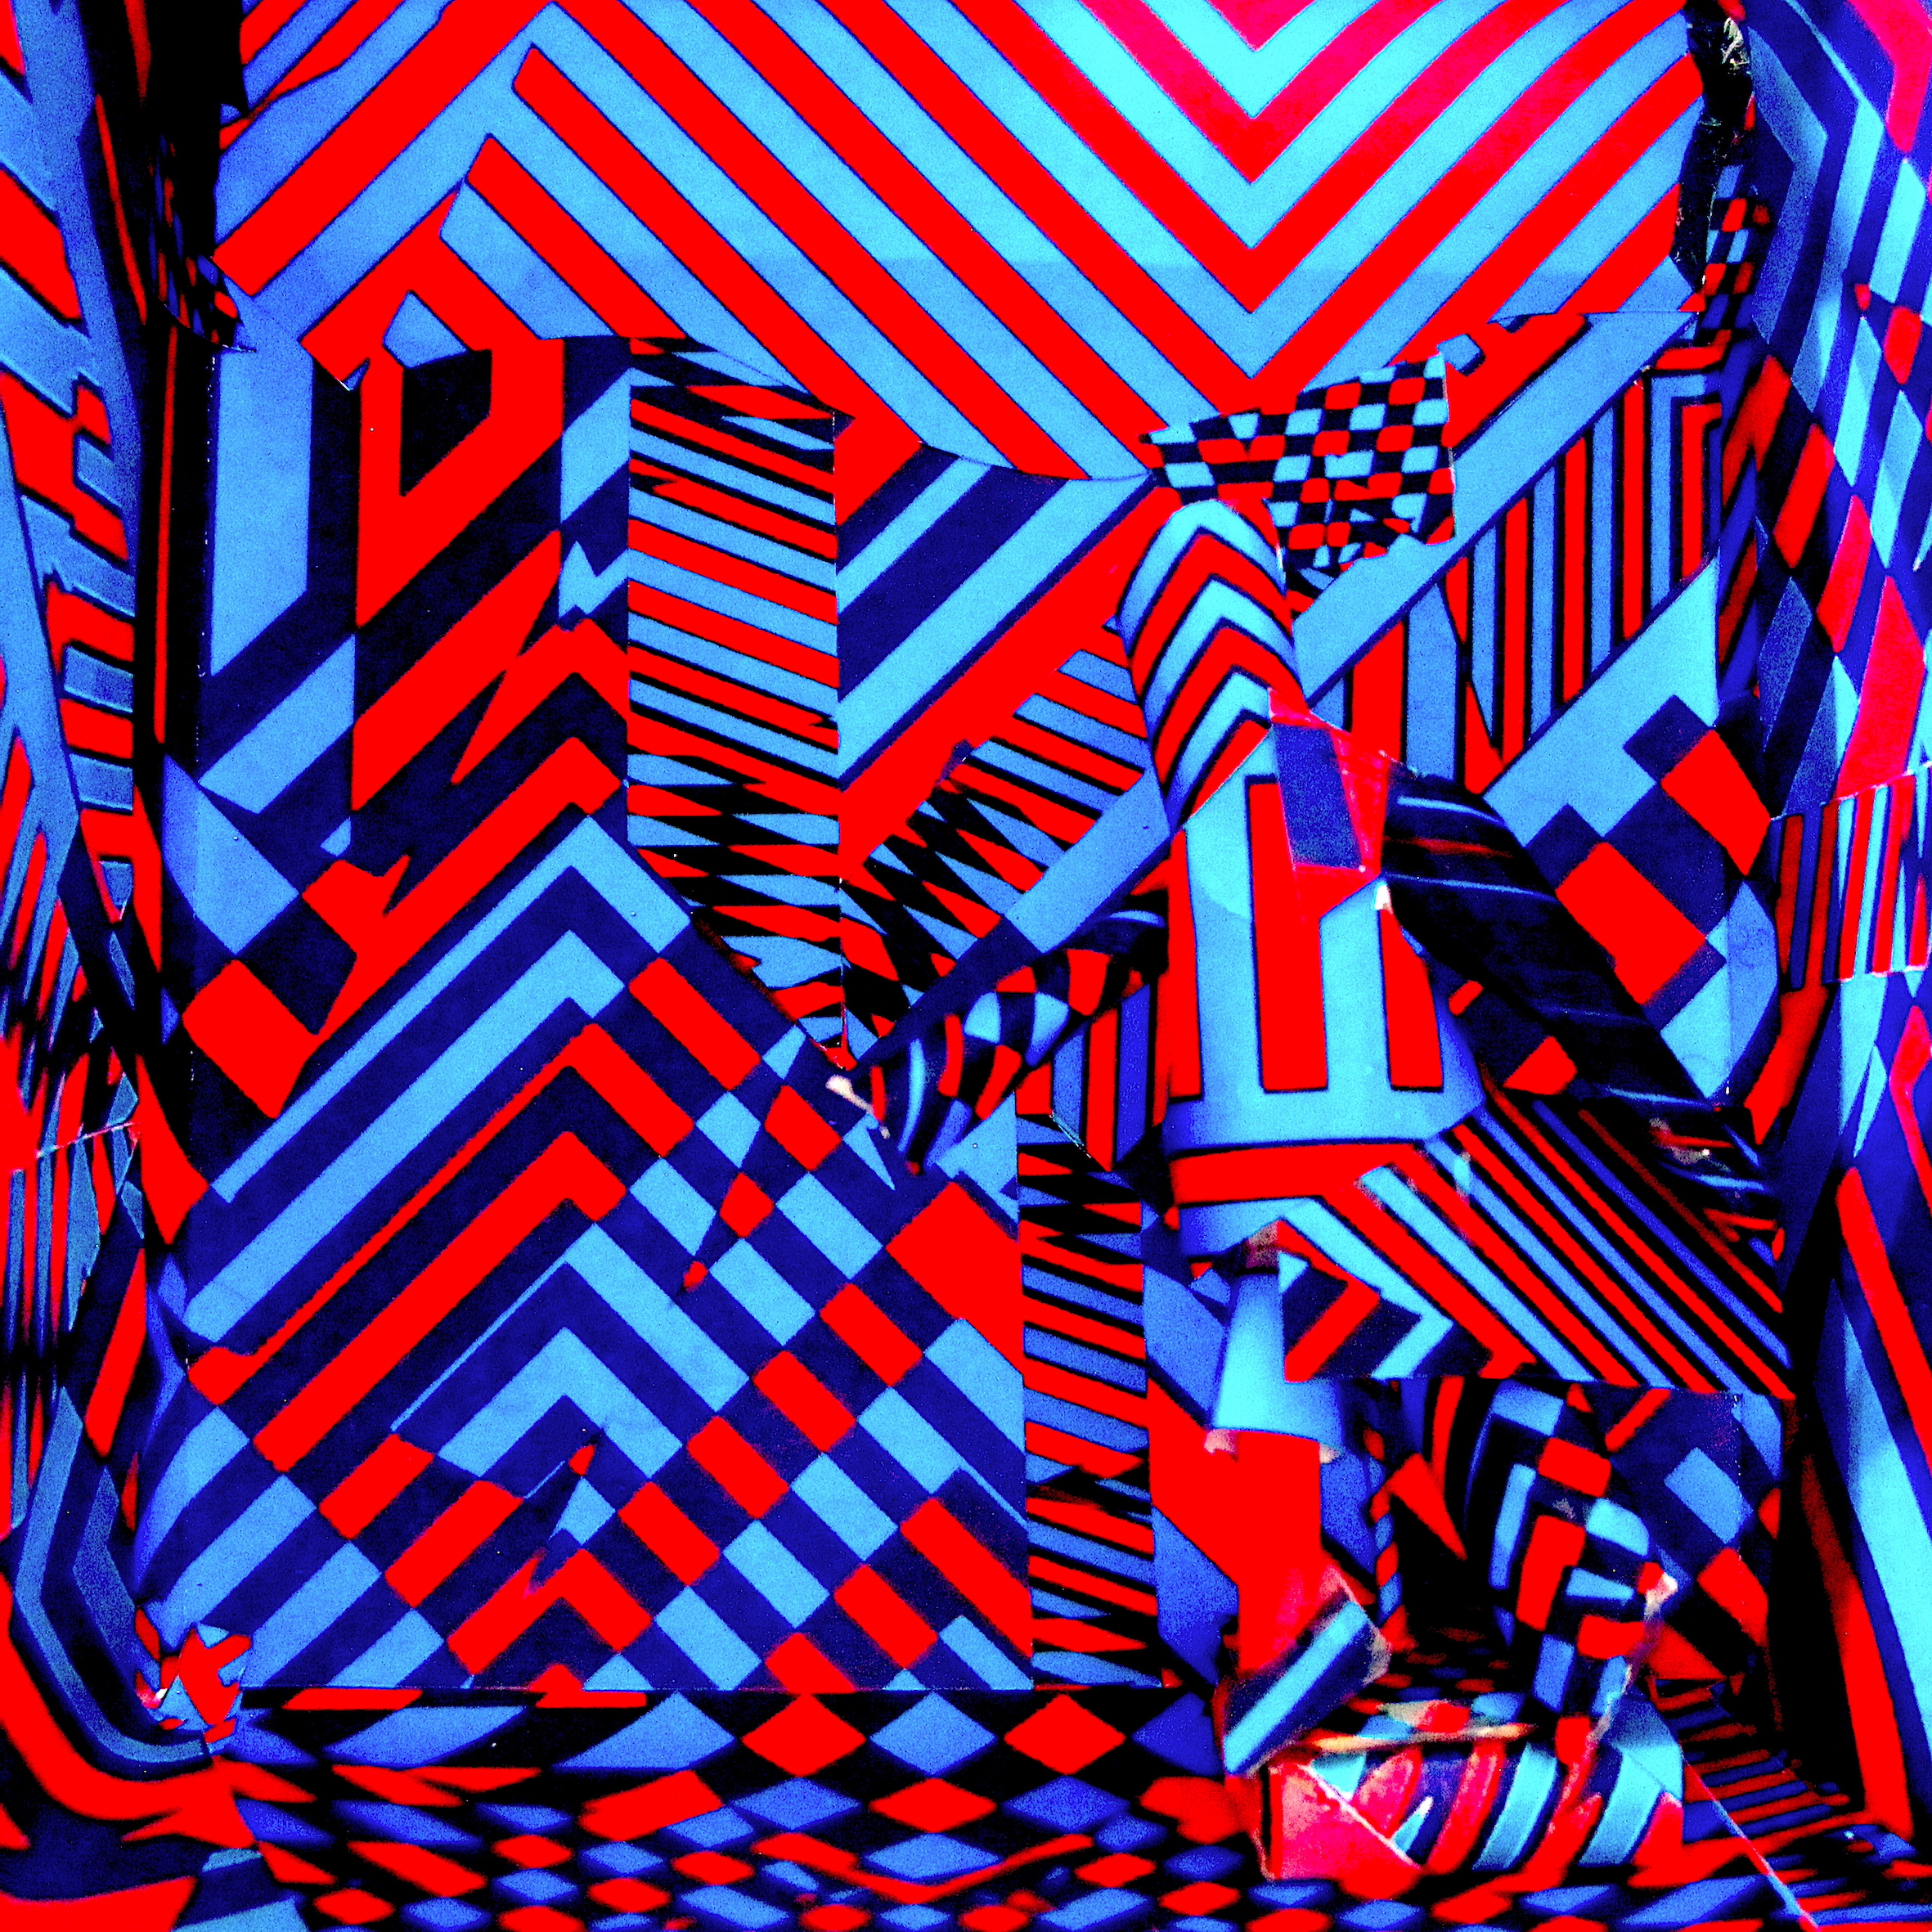 This image shows a 3D model of a figure and background in a blue and red geometric design.